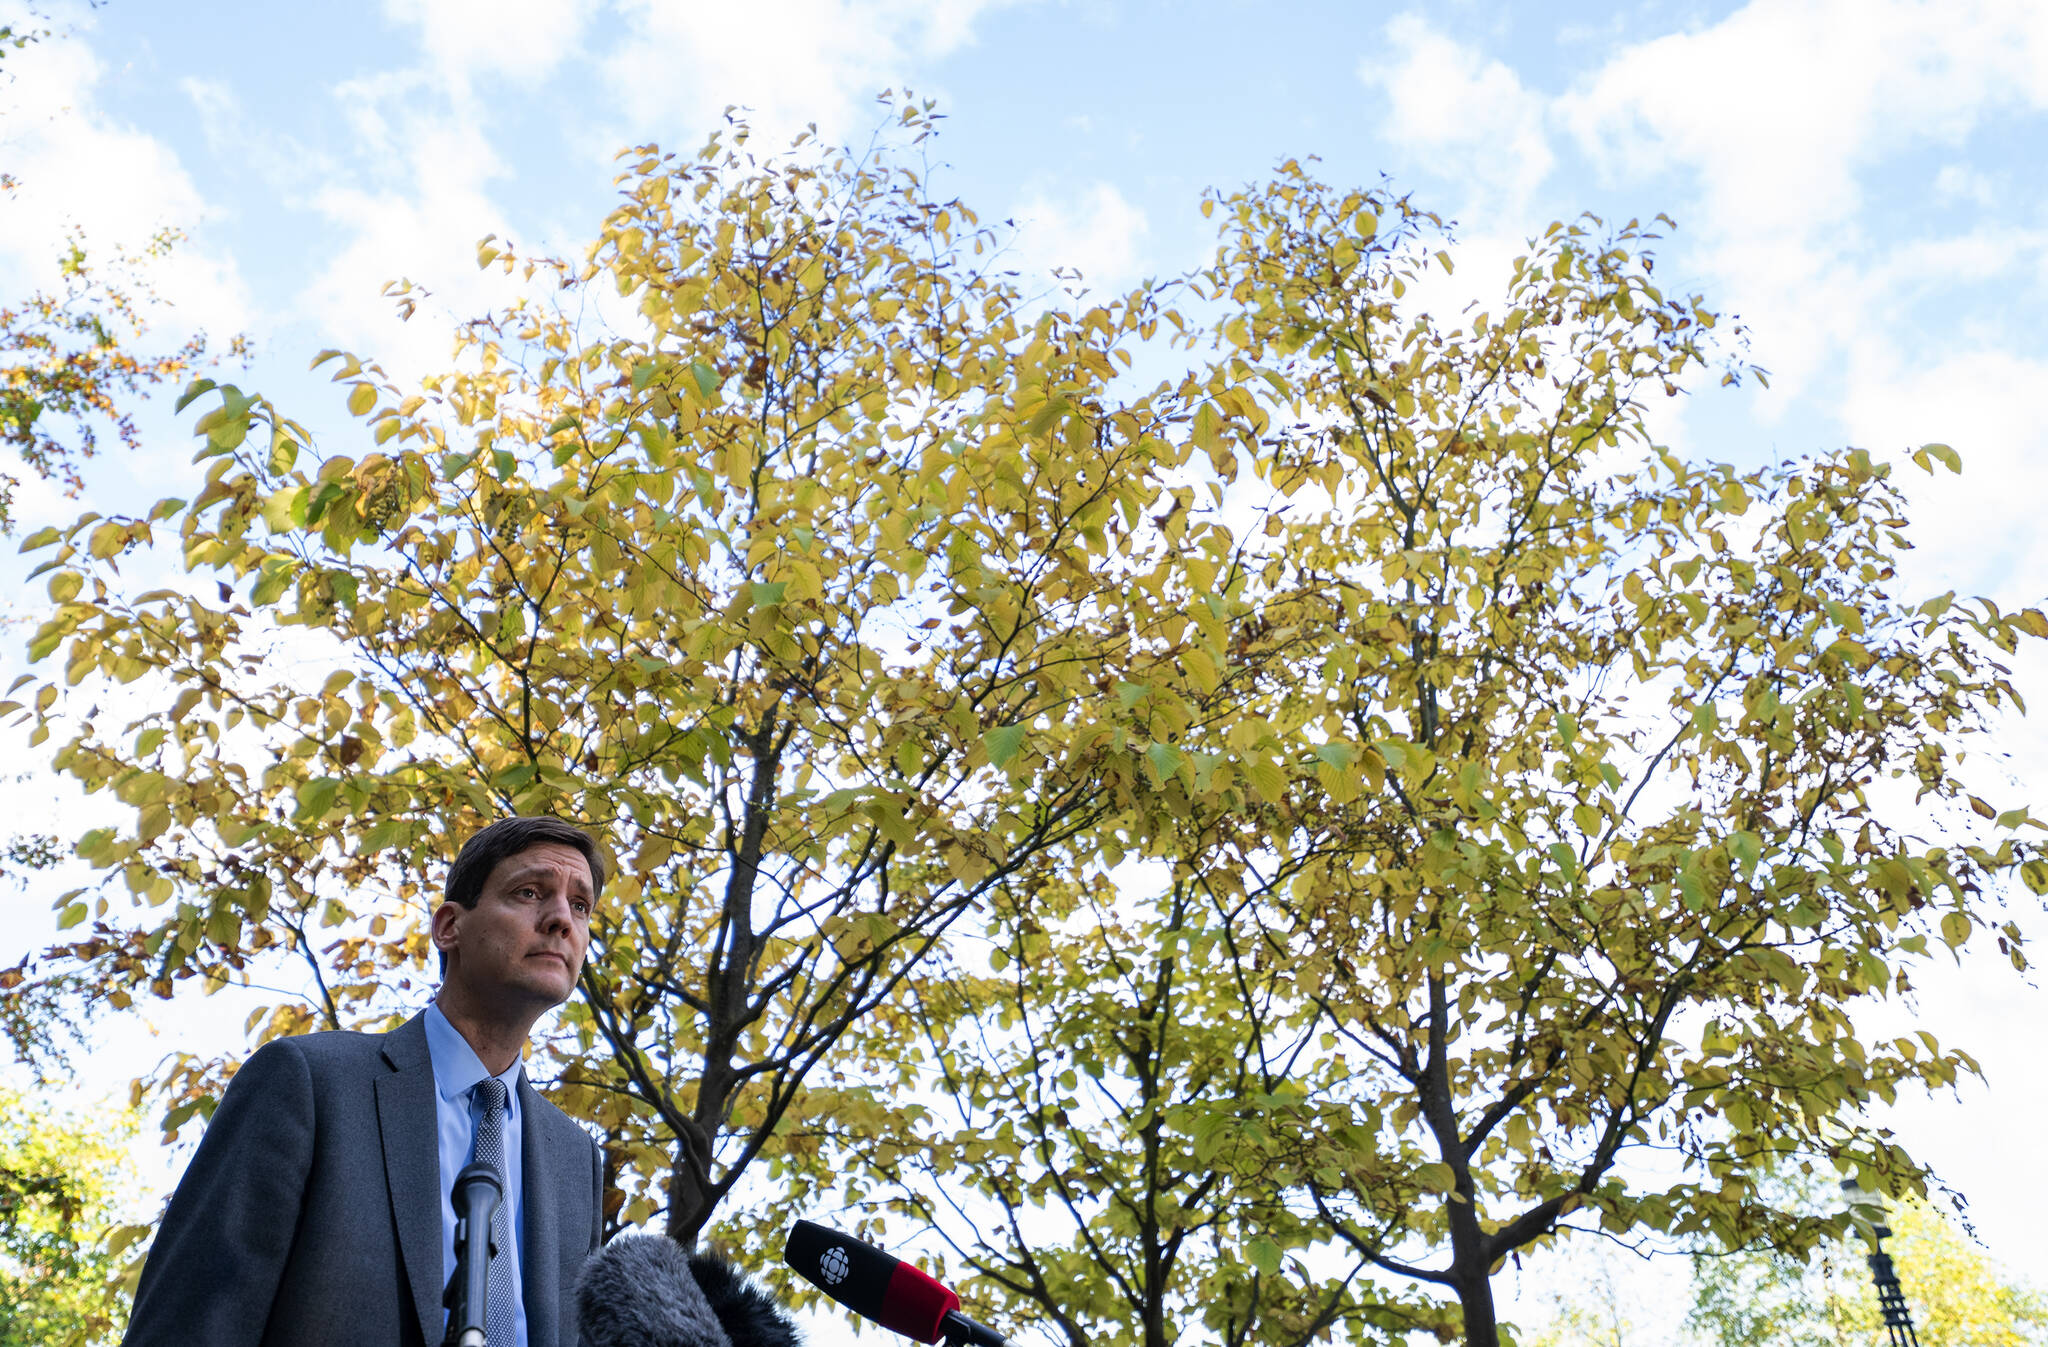 Former B.C. attorney general and housing minister David Eby speaks to the media during a news conference in a park in downtown Vancouver, Thursday, October 20, 2022.THE CANADIAN PRESS/Jonathan Hayward